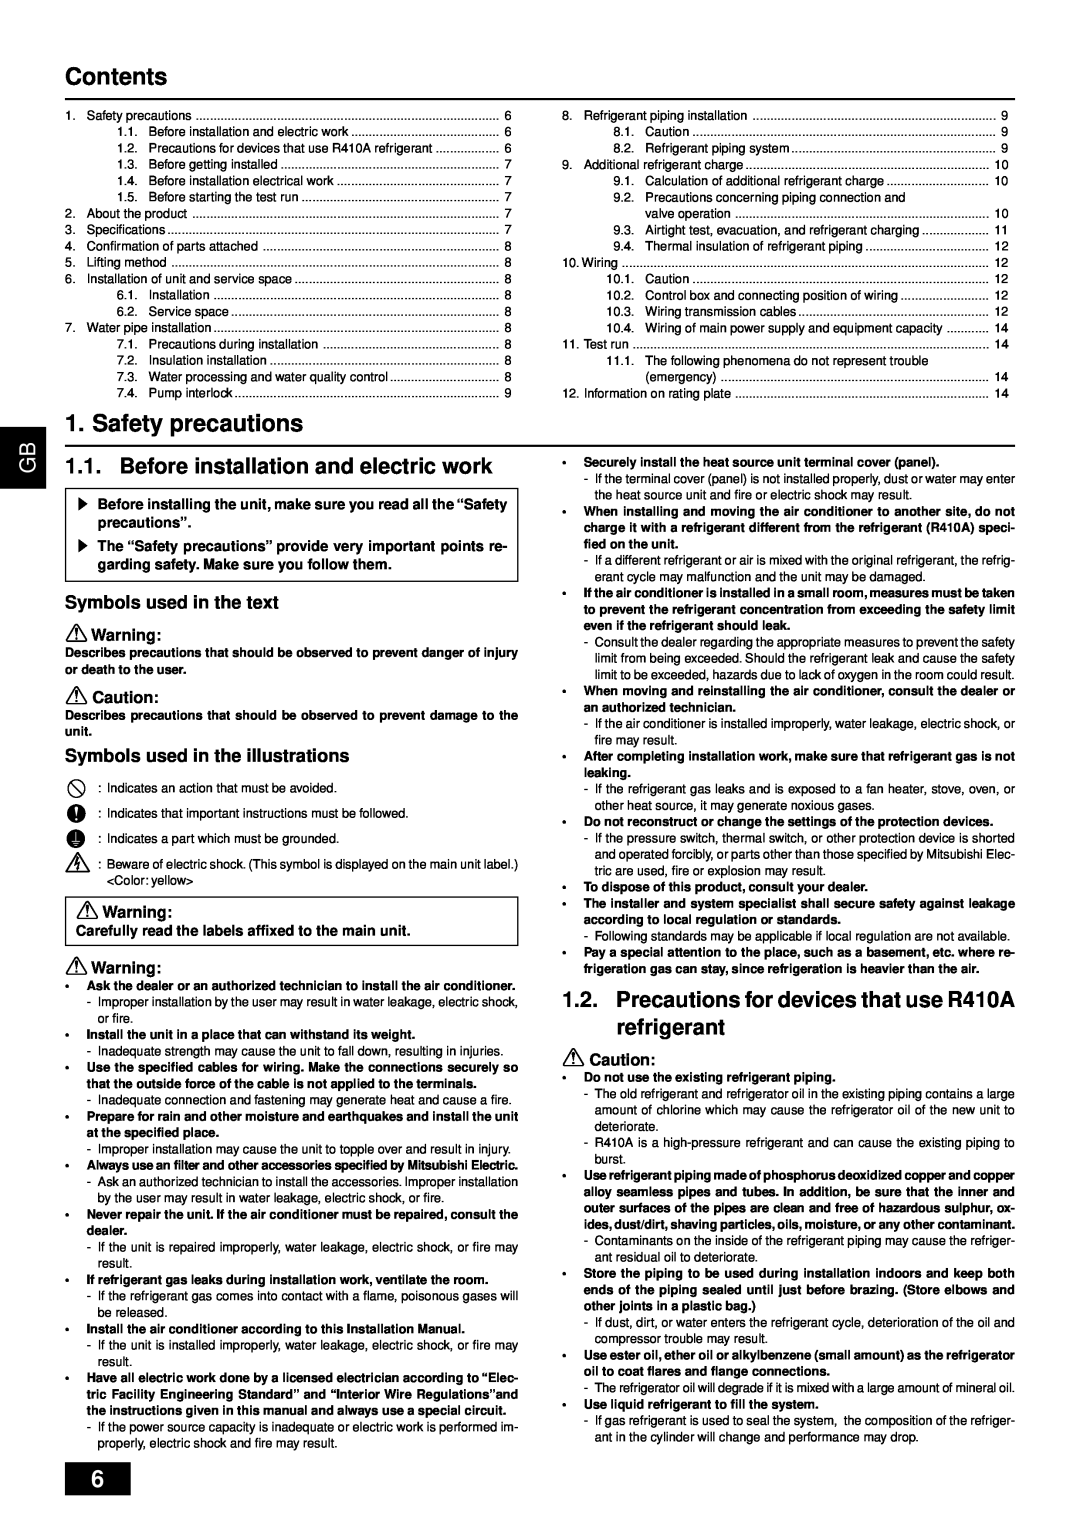 Bell Sports PQRY-P72-96TGMU-A installation manual Contents, Safety precautions, Before installation and electric work 